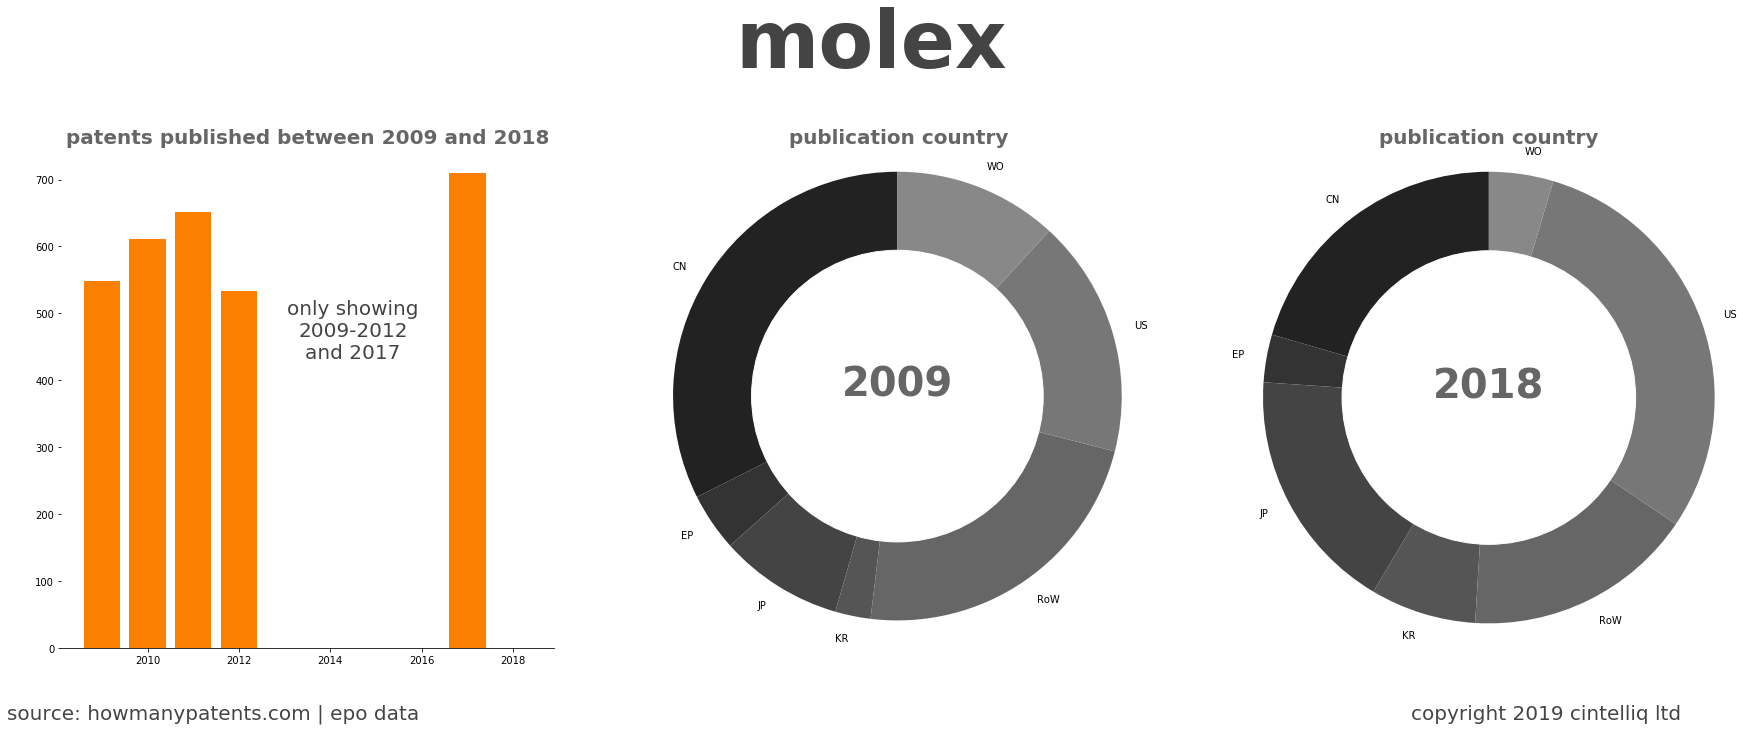 summary of patents for Molex